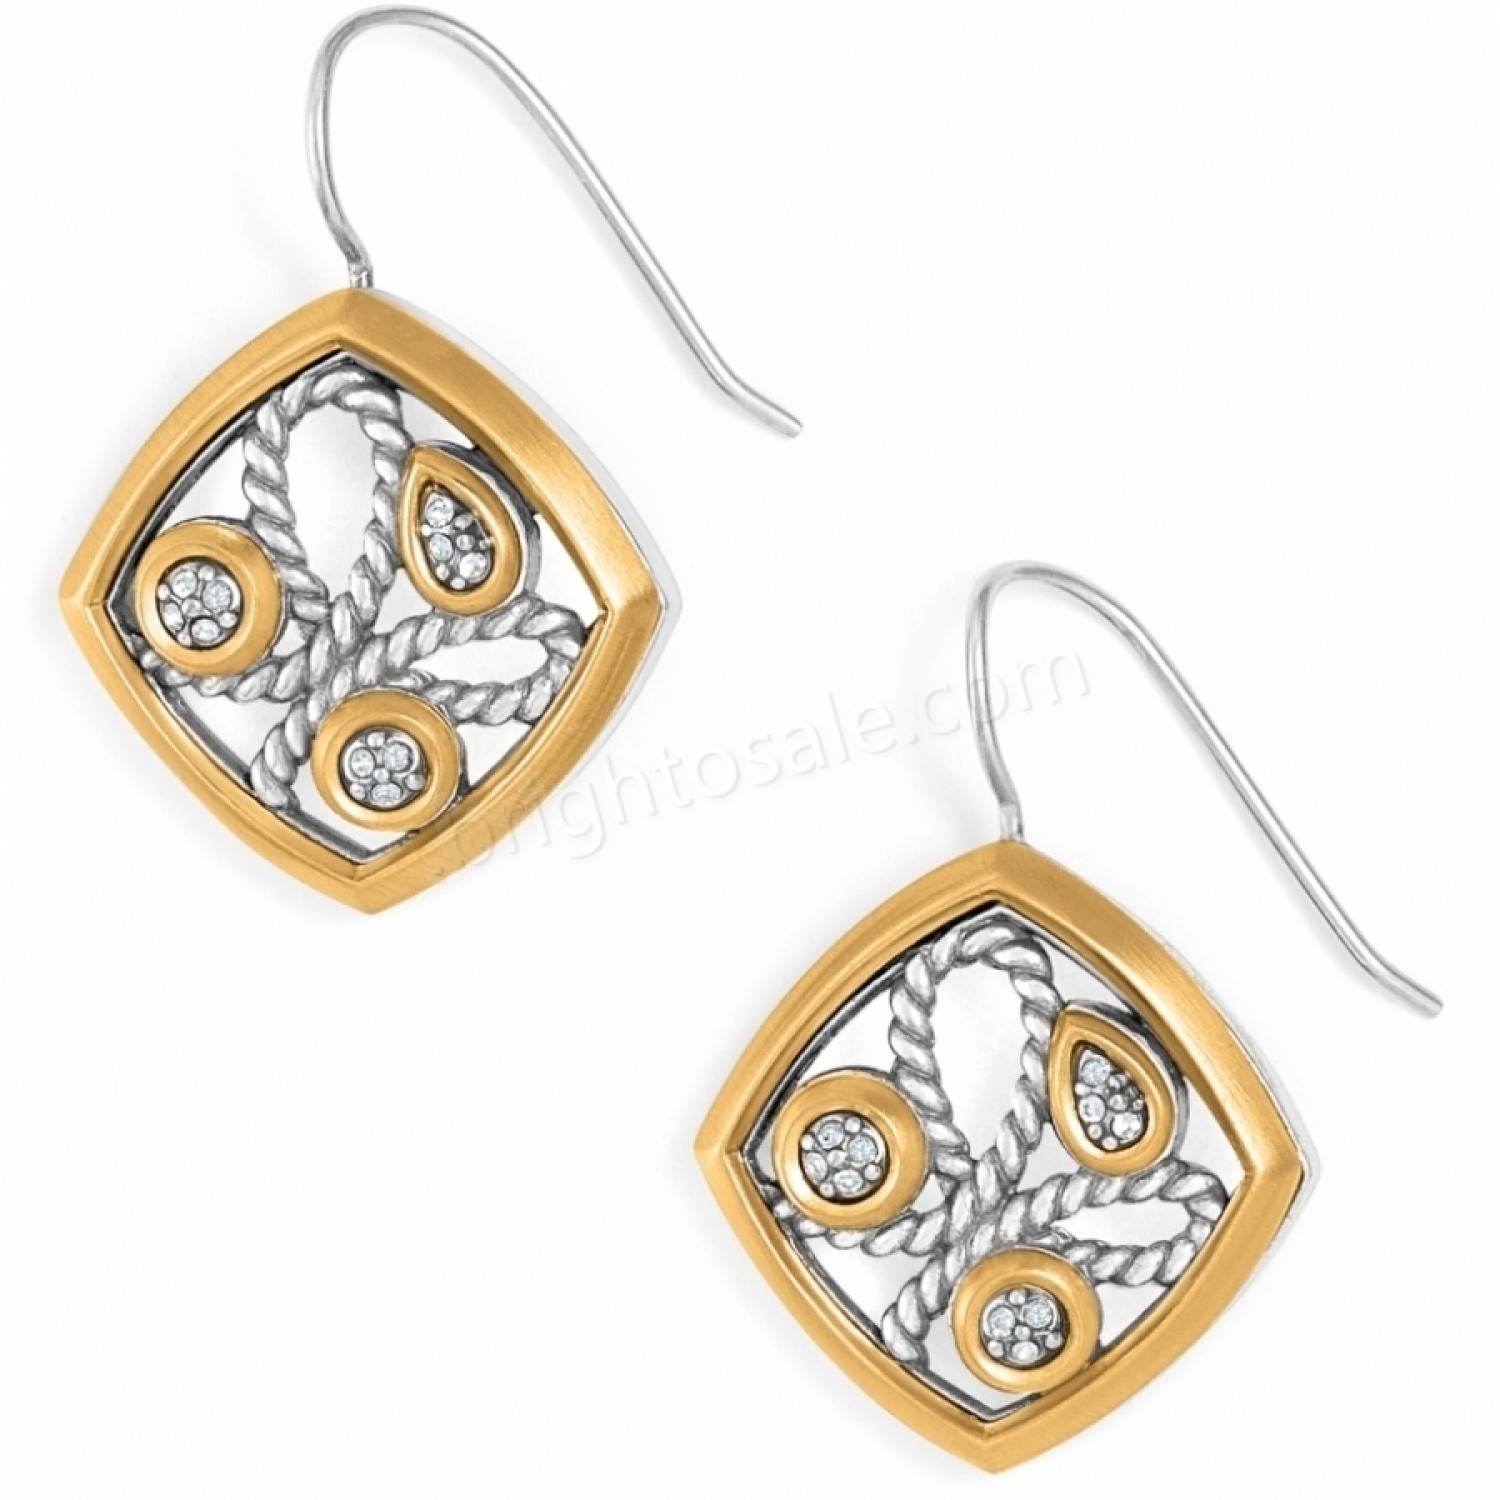 Brighton Collectibles & Online Discount Toledo Collective Charm Post Drop Earrings - Brighton Collectibles & Online Discount Toledo Collective Charm Post Drop Earrings